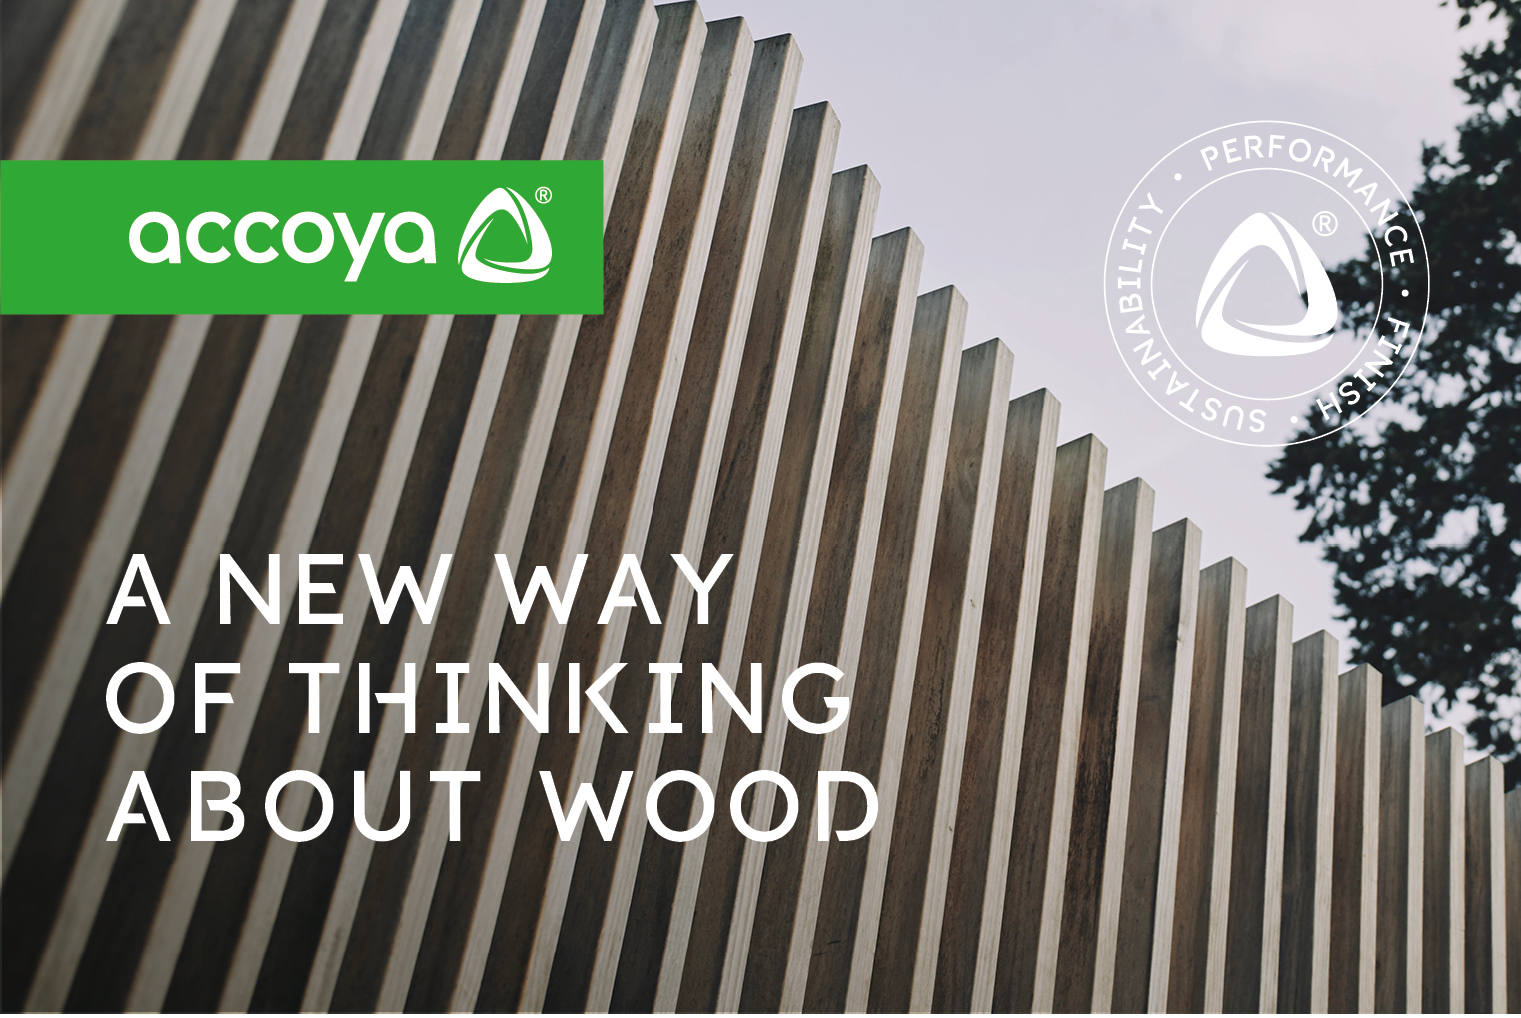 Accoya - A New Way Of Thinking About Wood